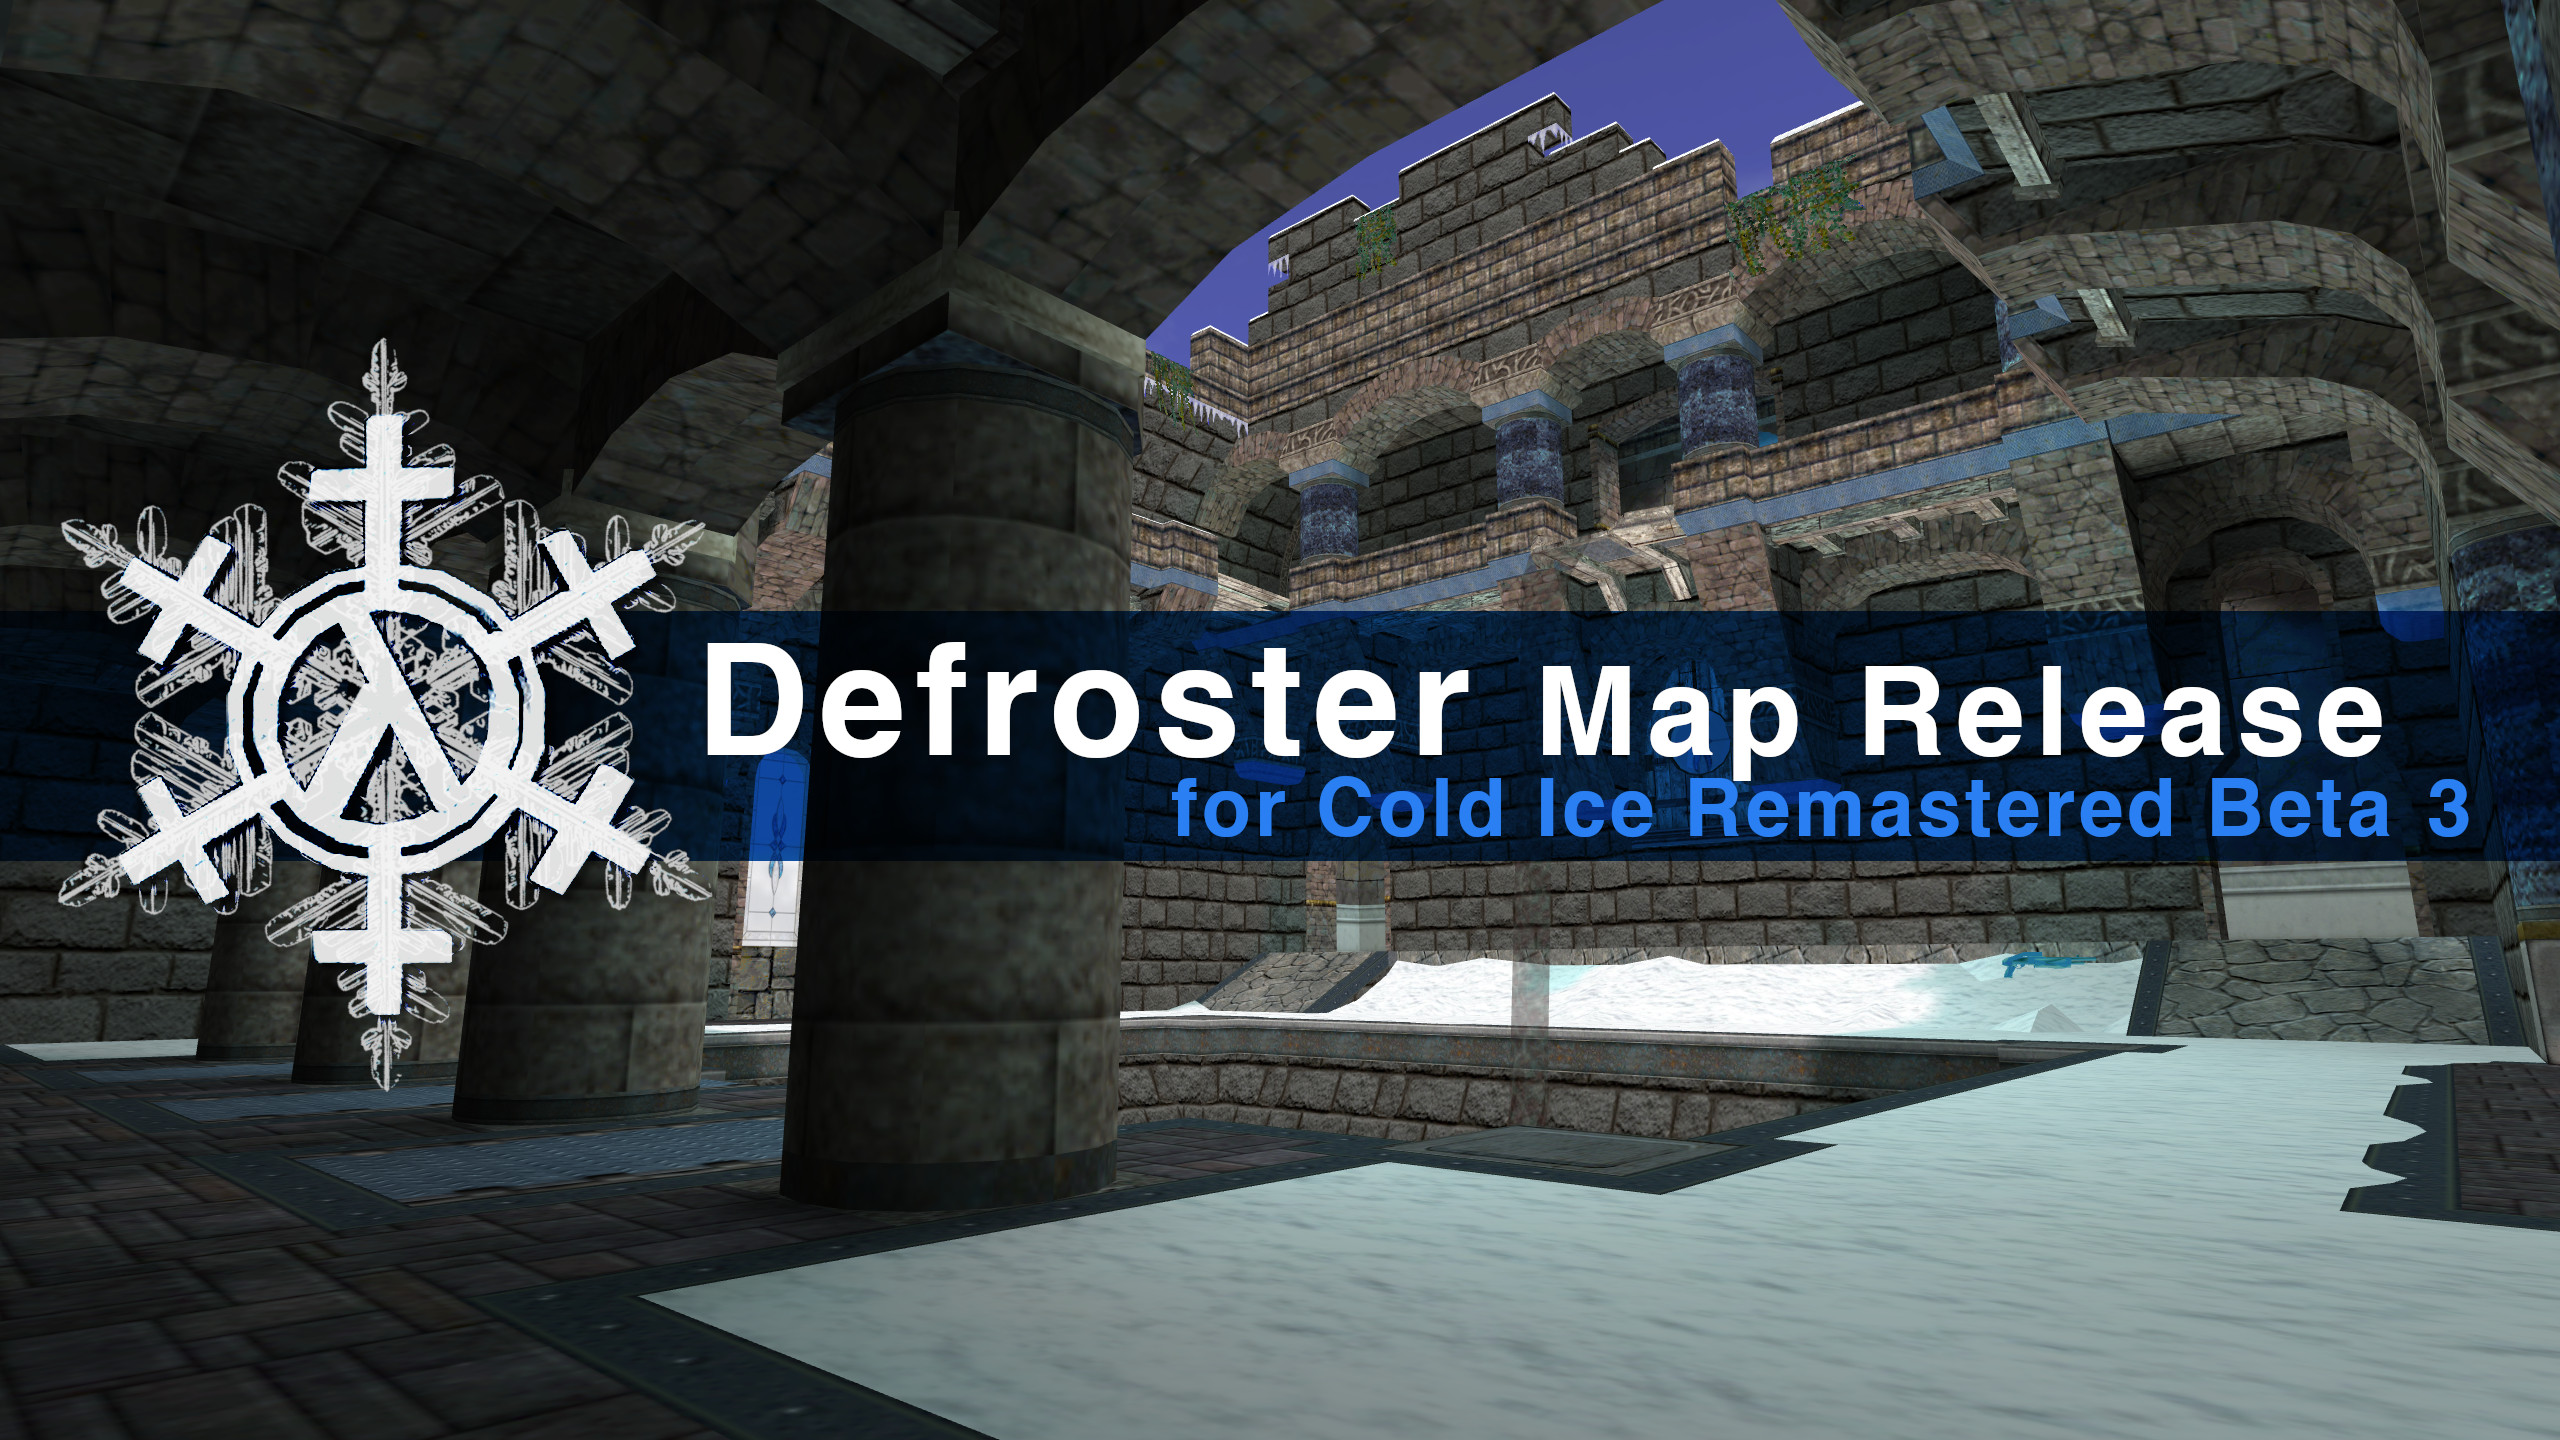 Defroster, an official map for Cold Ice Remastered Beta 3